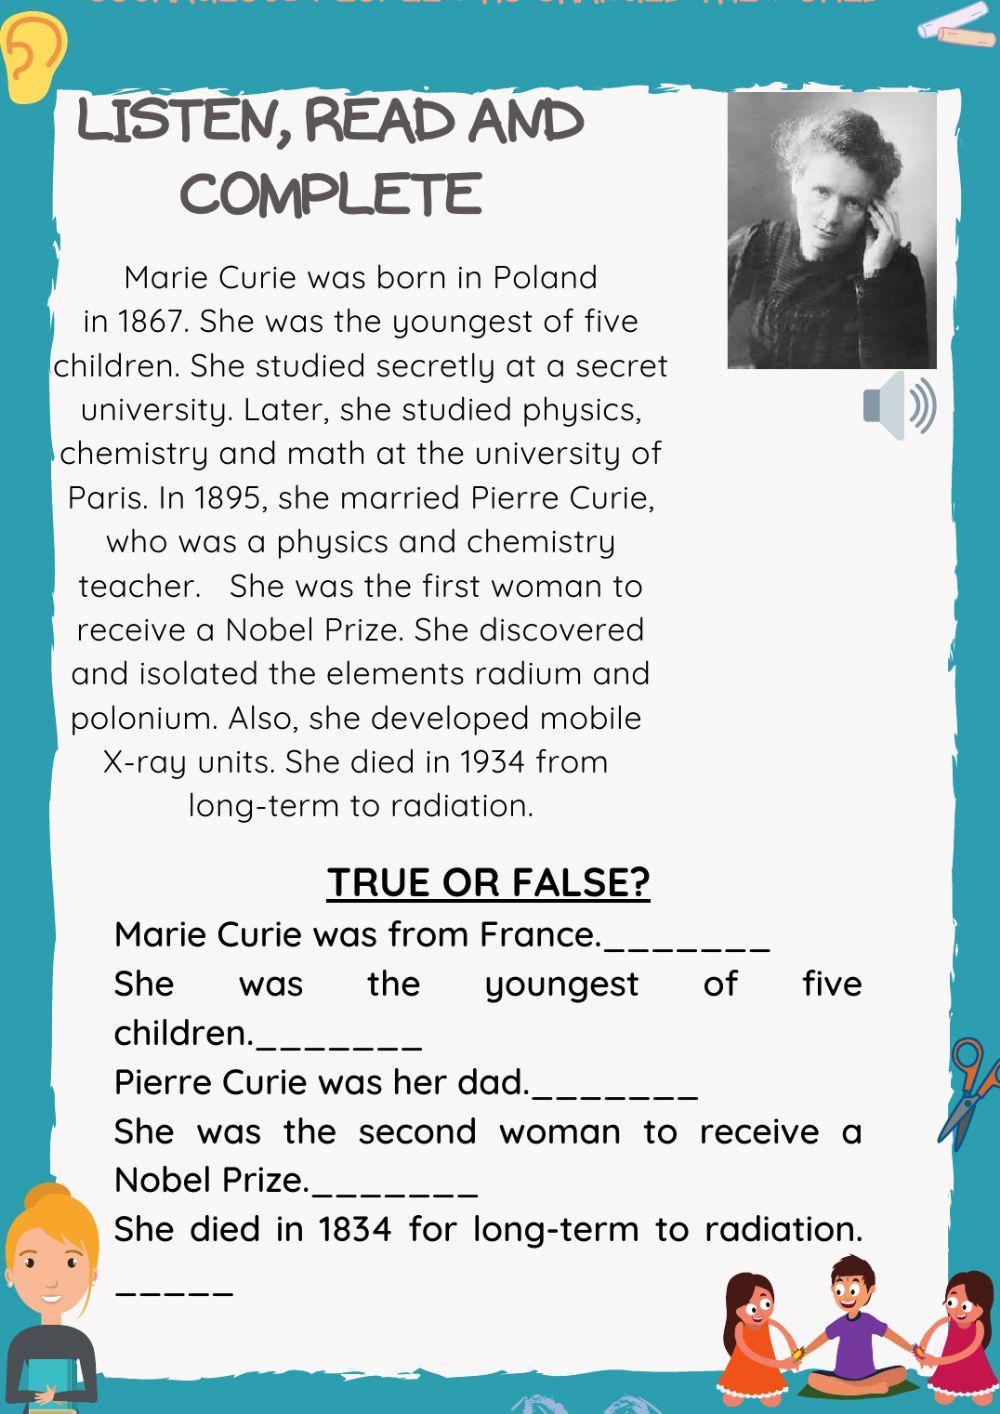 Courageous people who changed the world. marie curie